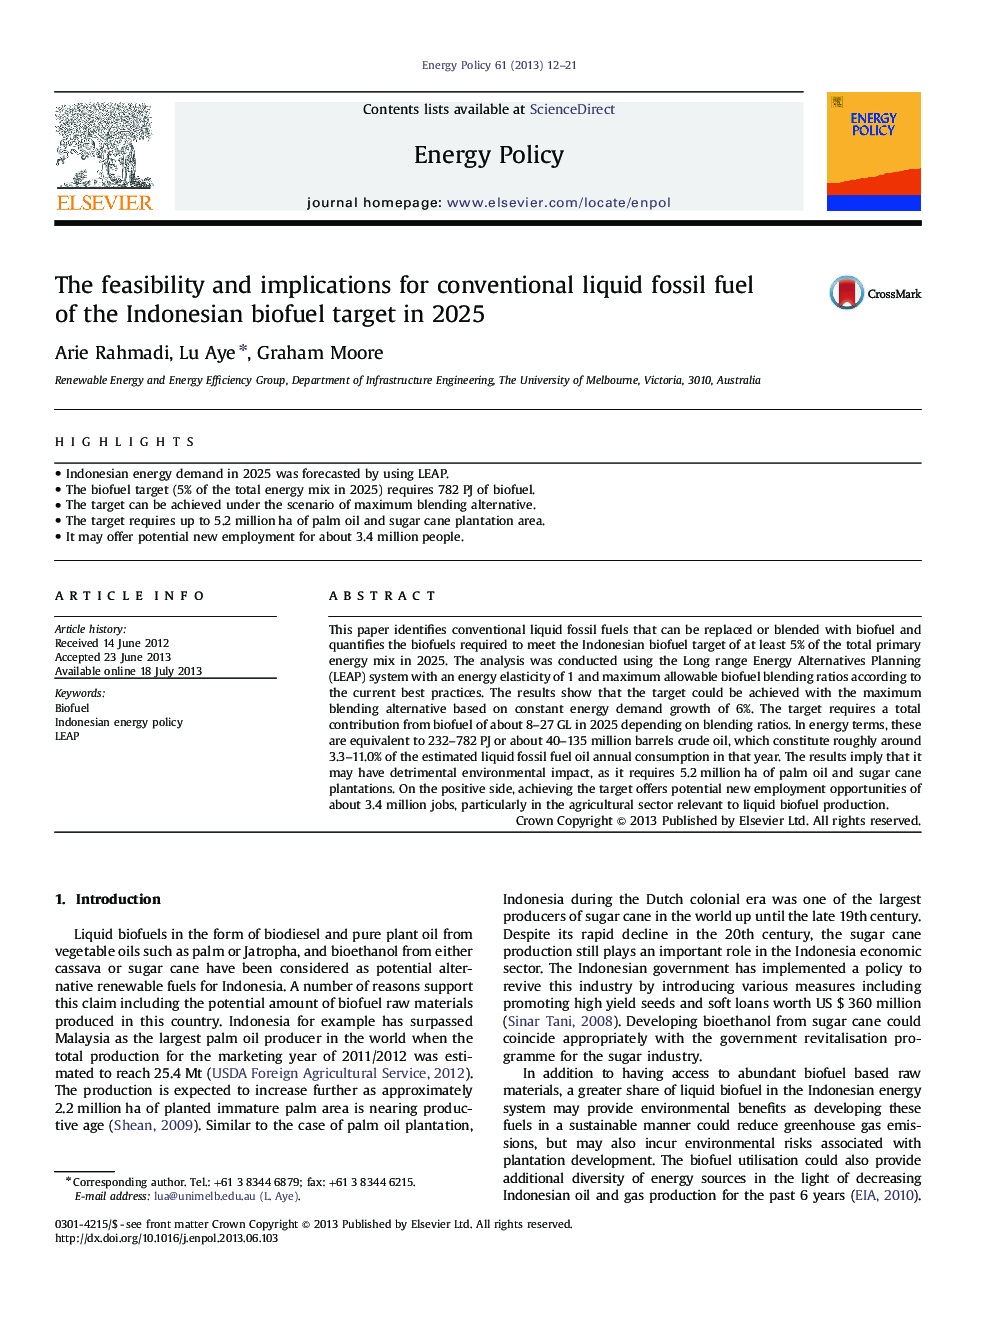 The feasibility and implications for conventional liquid fossil fuel of the Indonesian biofuel target in 2025